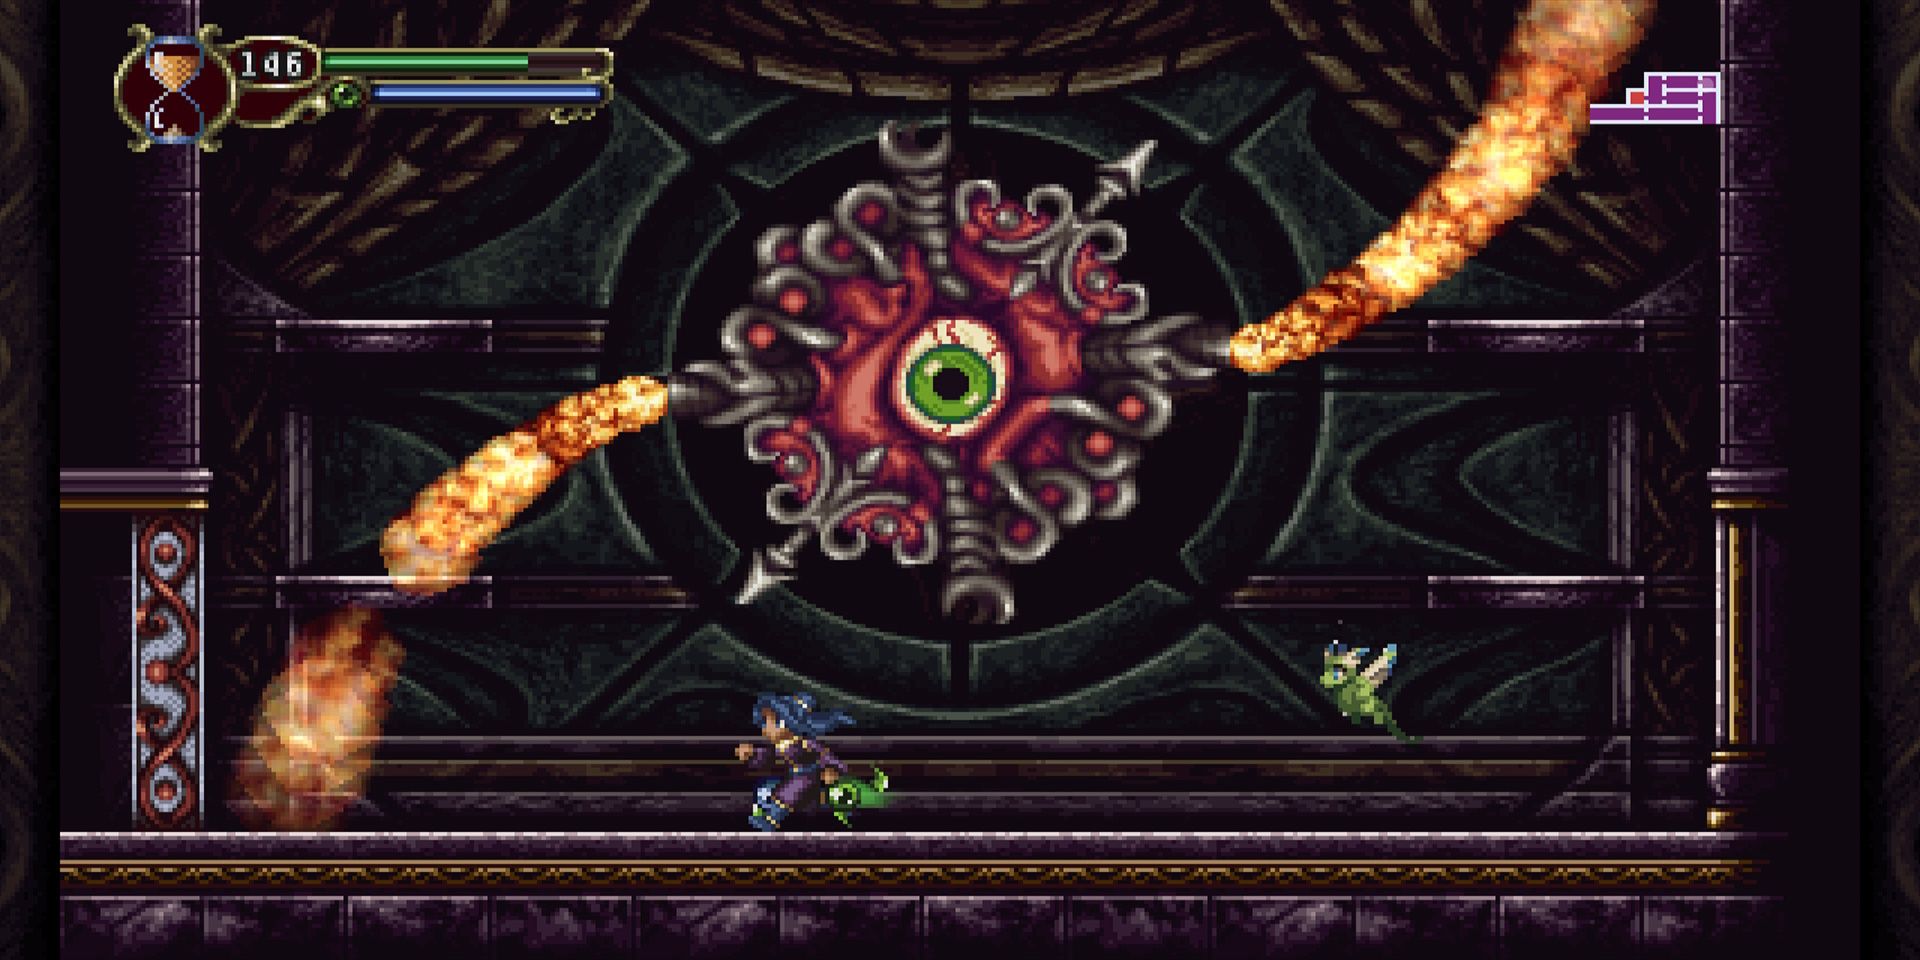 The main character fighting the boss who becomes eyes in Time Spinner